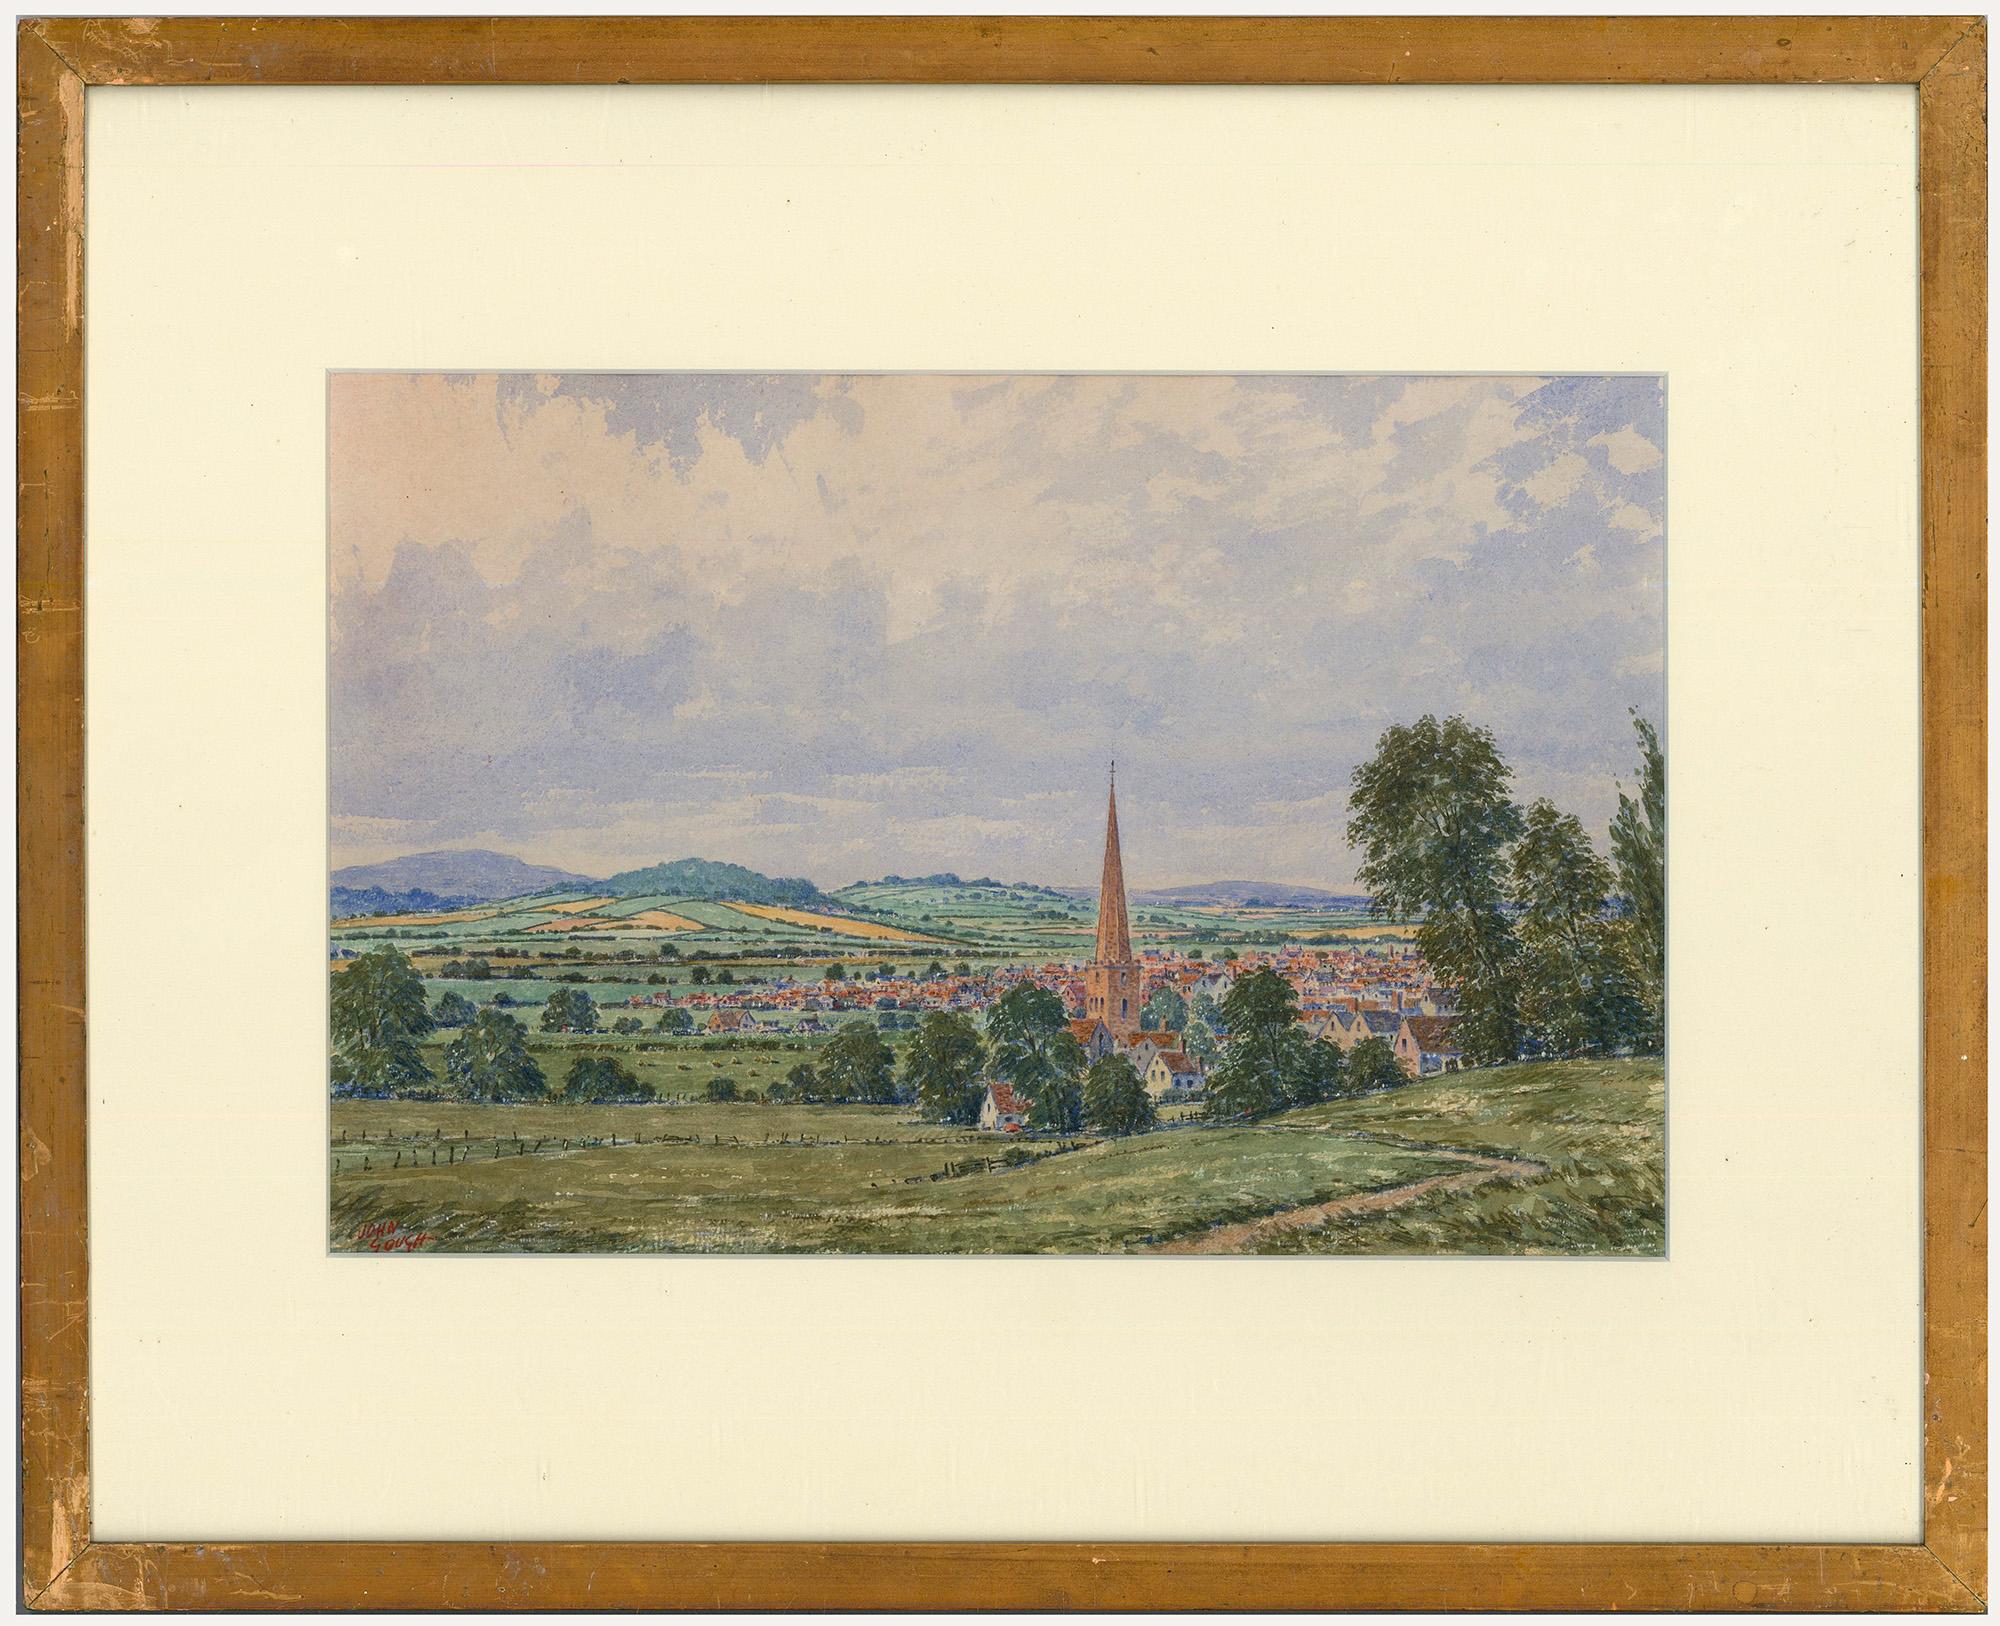 A fine watercolour by the British artist John Weston Gough, depicting an English town with church spire and rolling hills in the distance. Presented in a distressed gilt frame and cream card mount. Signed to the lower left. On paper. 